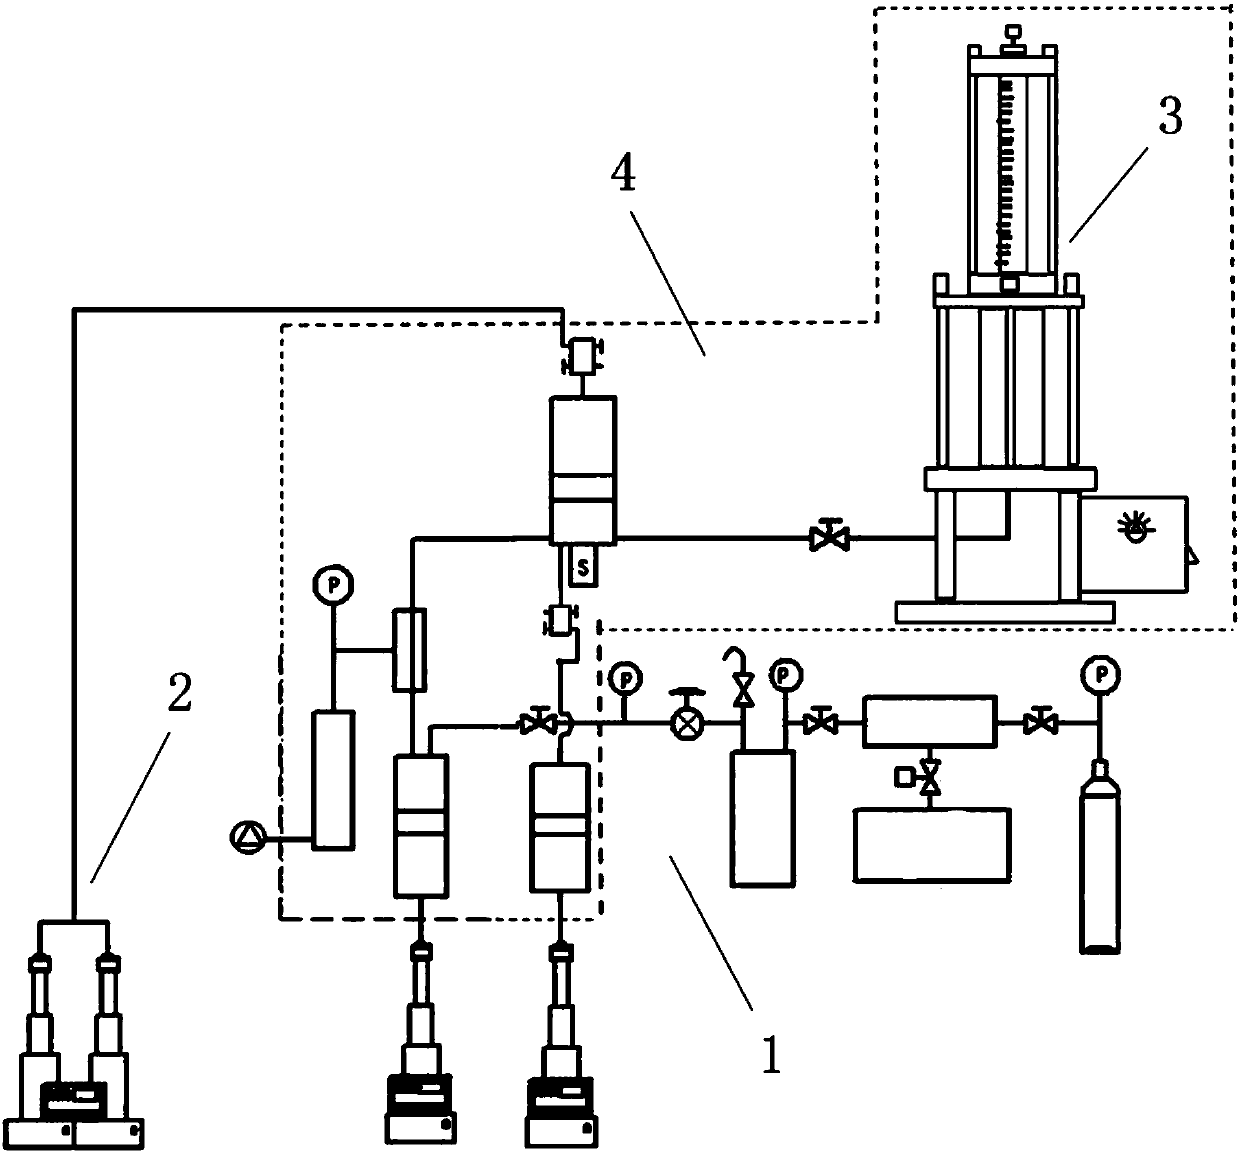 Infiltration and suction system for enhancing carbonated water under high temperature and high pressure conditions